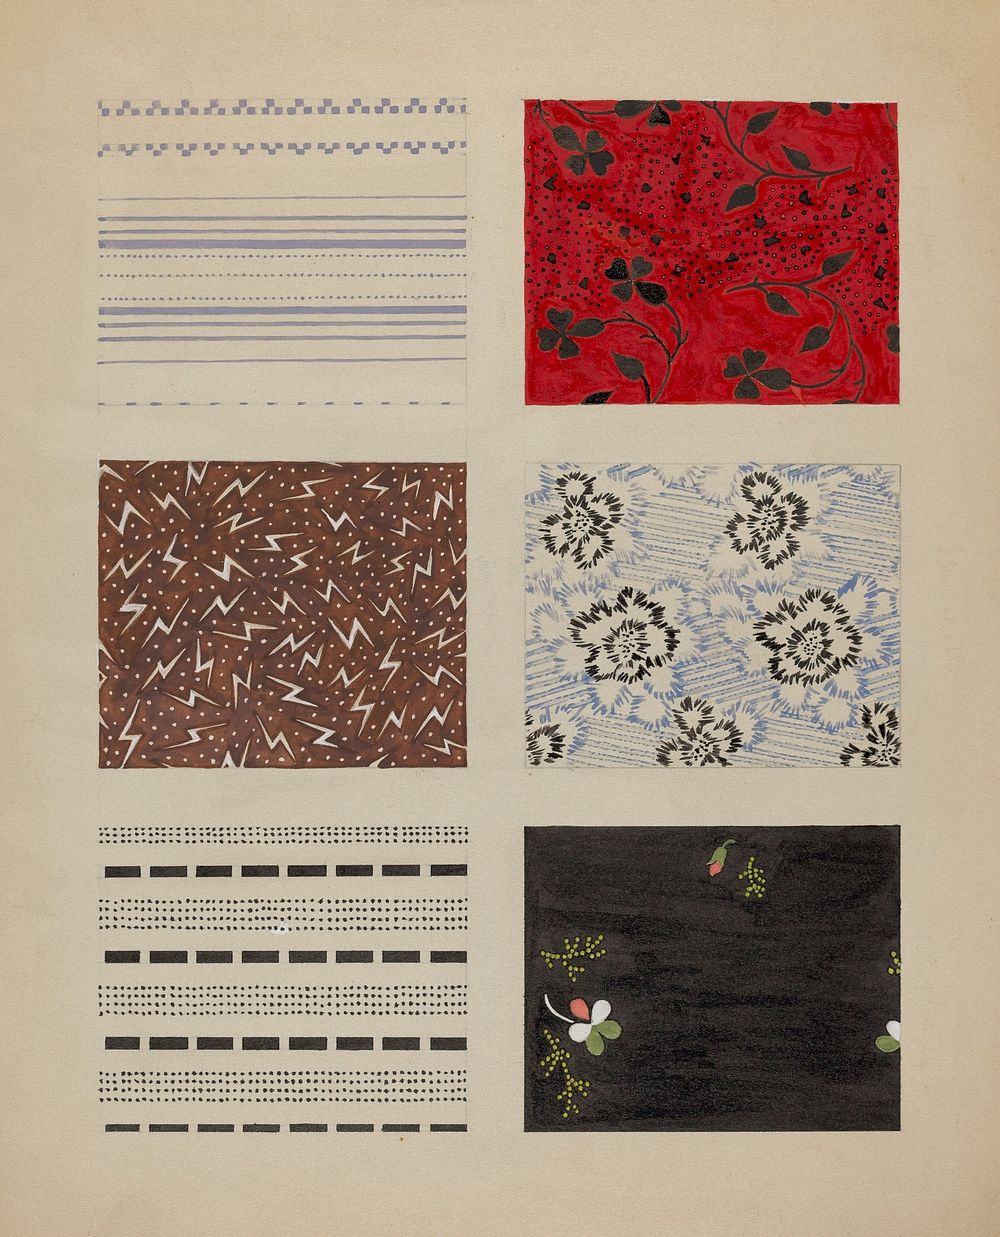 Quilt Patches, c. 1937 by Dorothy Posten.  